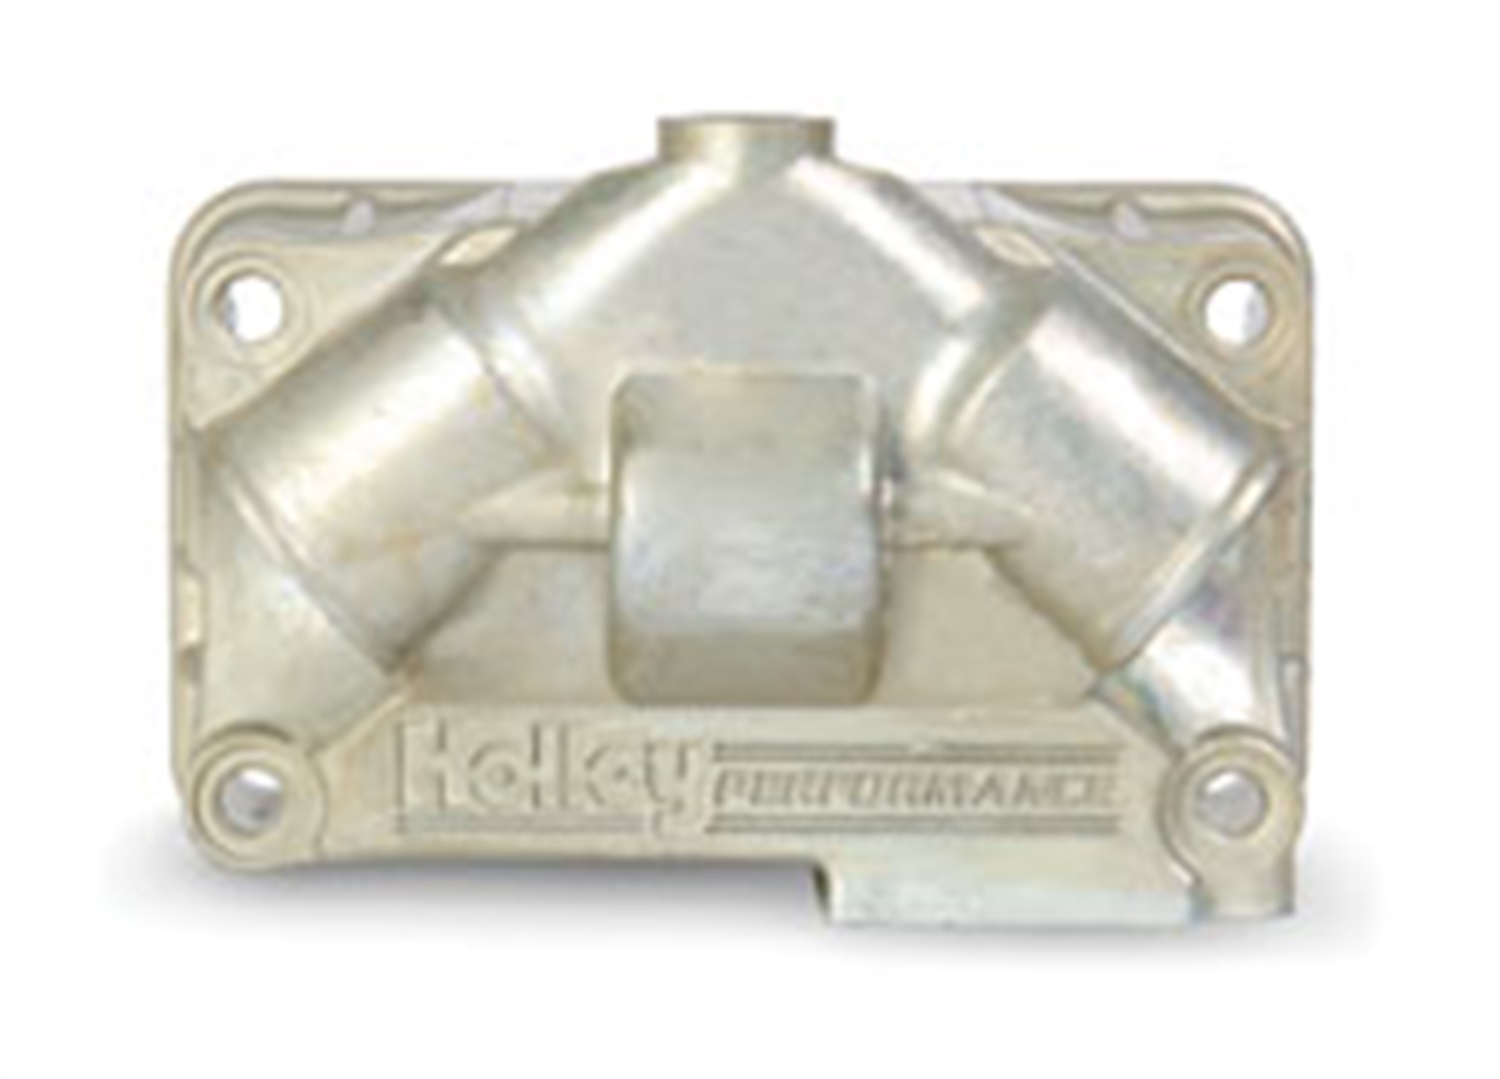 Holley Performance Holley Performance 134-103 Replacement Fuel Bowl Kit